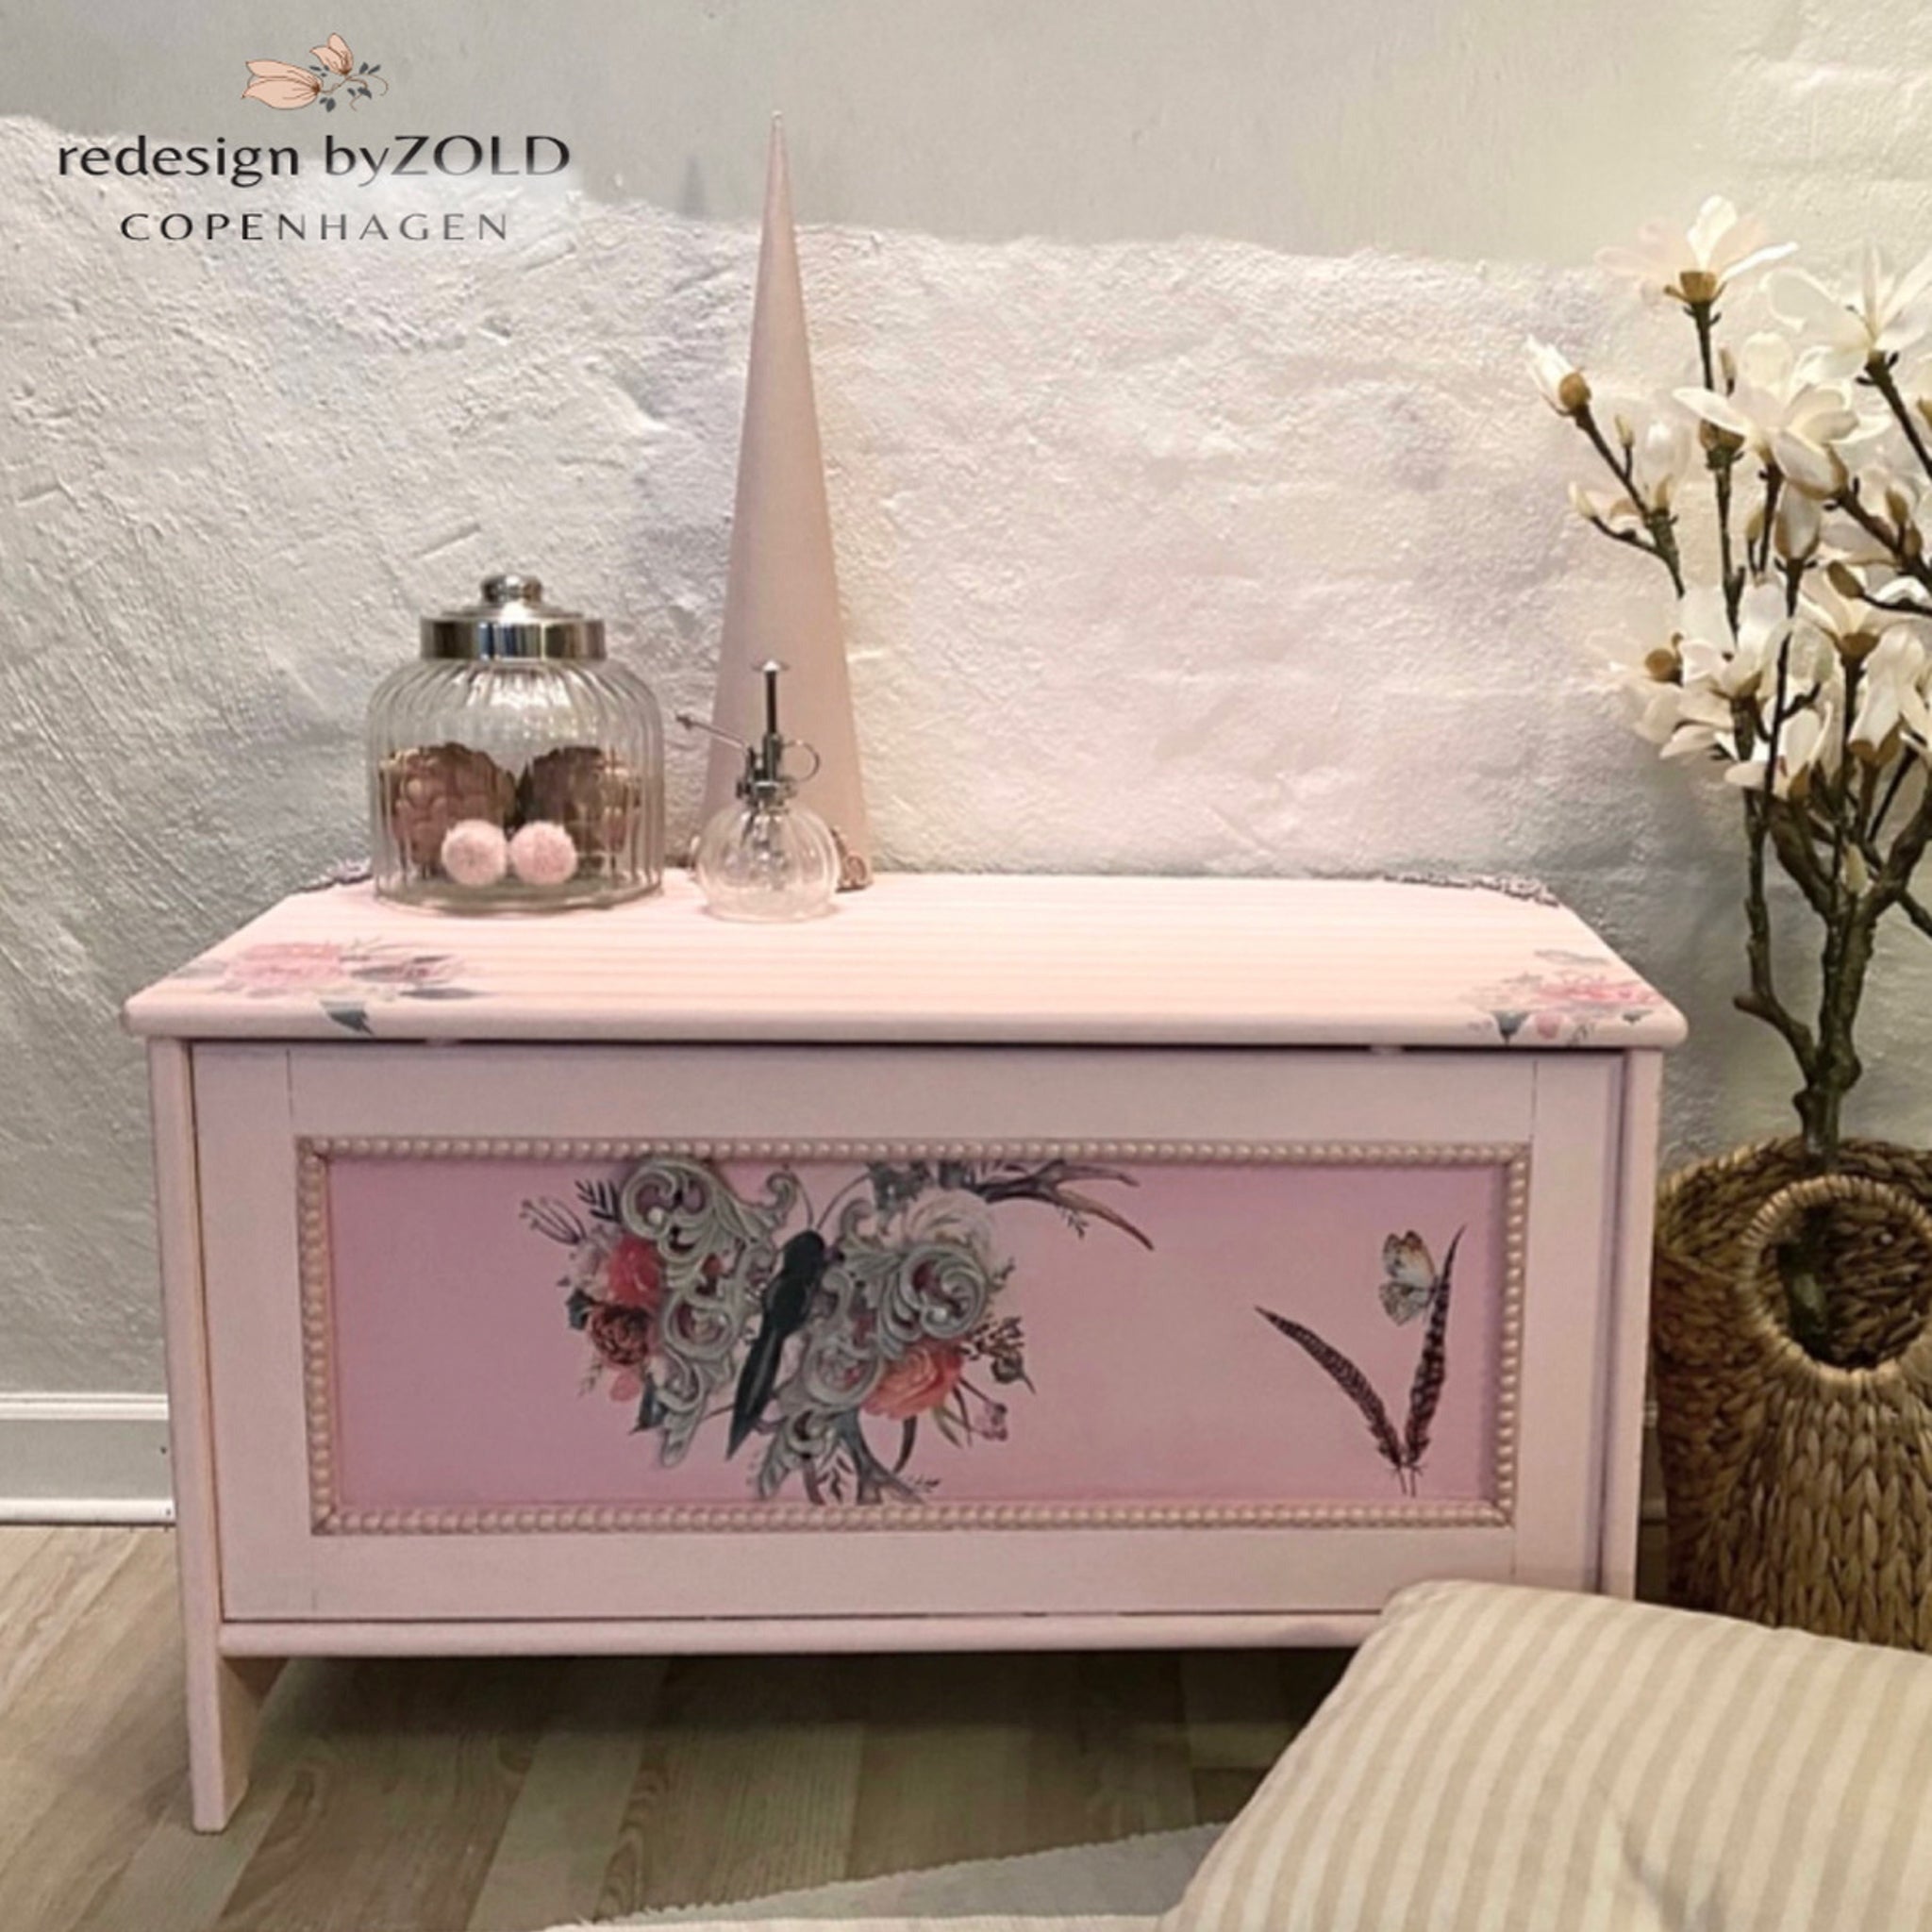 A vintage storage chest refurbished by Redesign by Zold Copenhagen is painted in pale pinks and feature the Flower Child transfer.